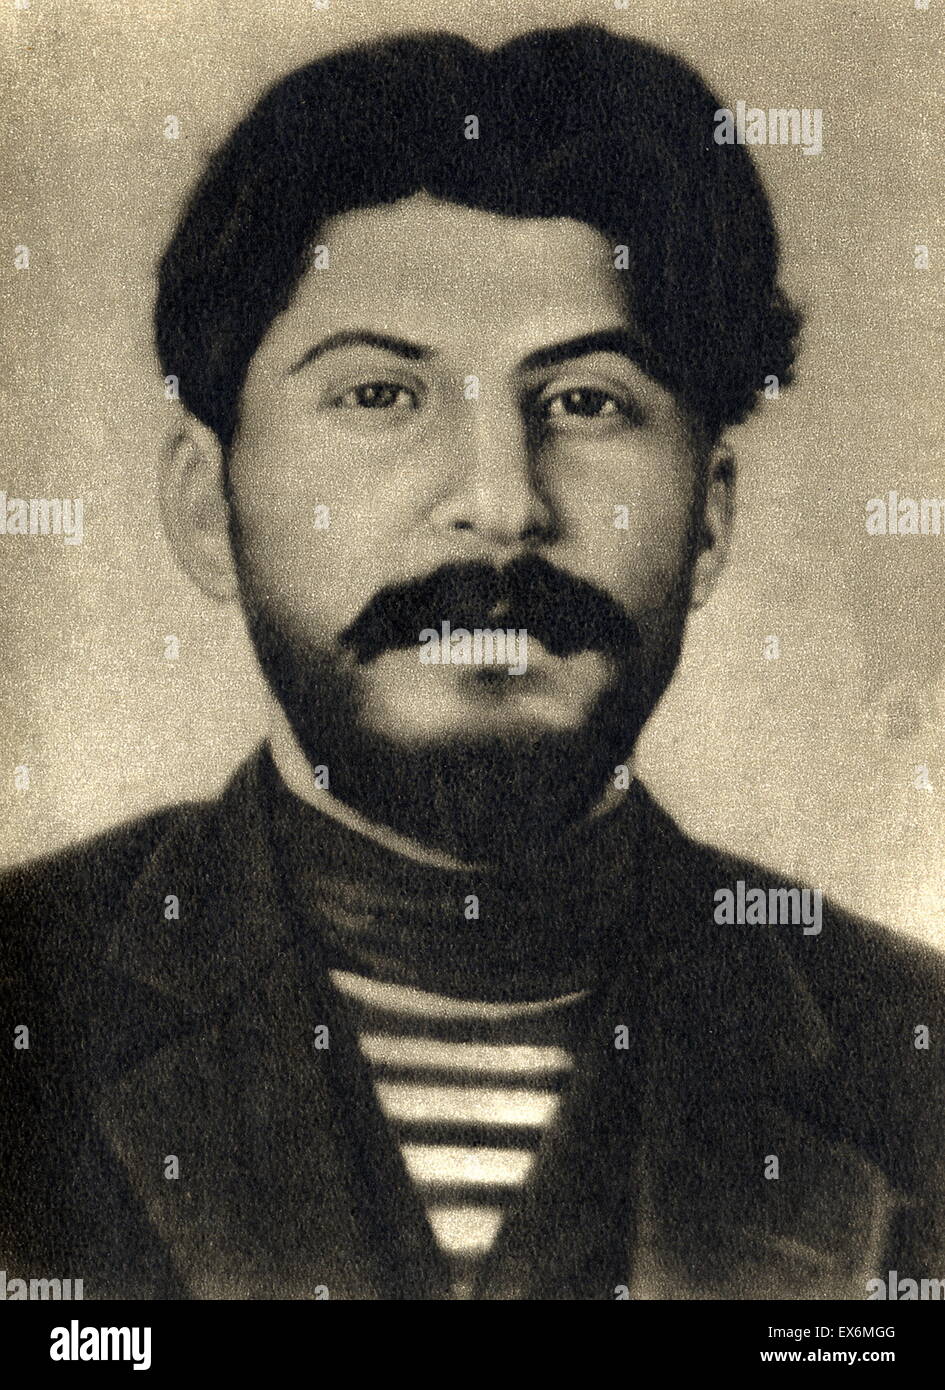 Josef Stalin 1878 – 1953. Aged 23 in 1917. Stalin became leader of the Soviet Union from the mid-1920s until his death in 1953. Stock Photo